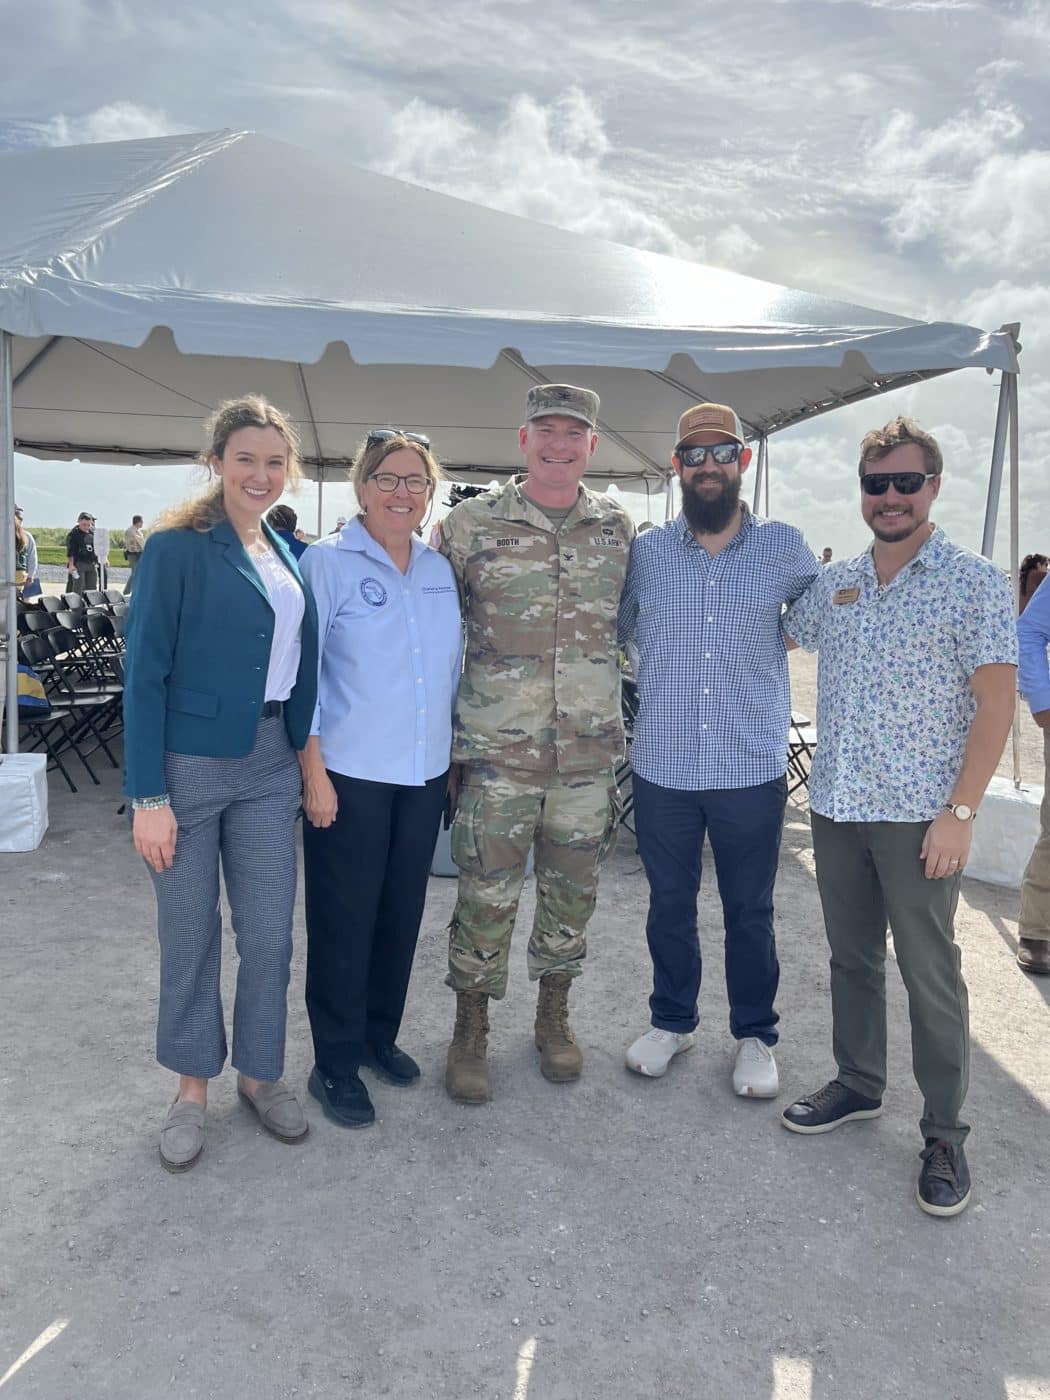 L-R: SCCF Policy & Advocacy Associate Allie Pecenka, SFWMD Governing Board Member Charlette Roman, U.S. Army Corps Jacksonville District Commander Colonel James L. Booth, Captains for Clean Water Co-Founder Daniel Andrews, and SCCF Environmental Policy Director Matt DePaolis.